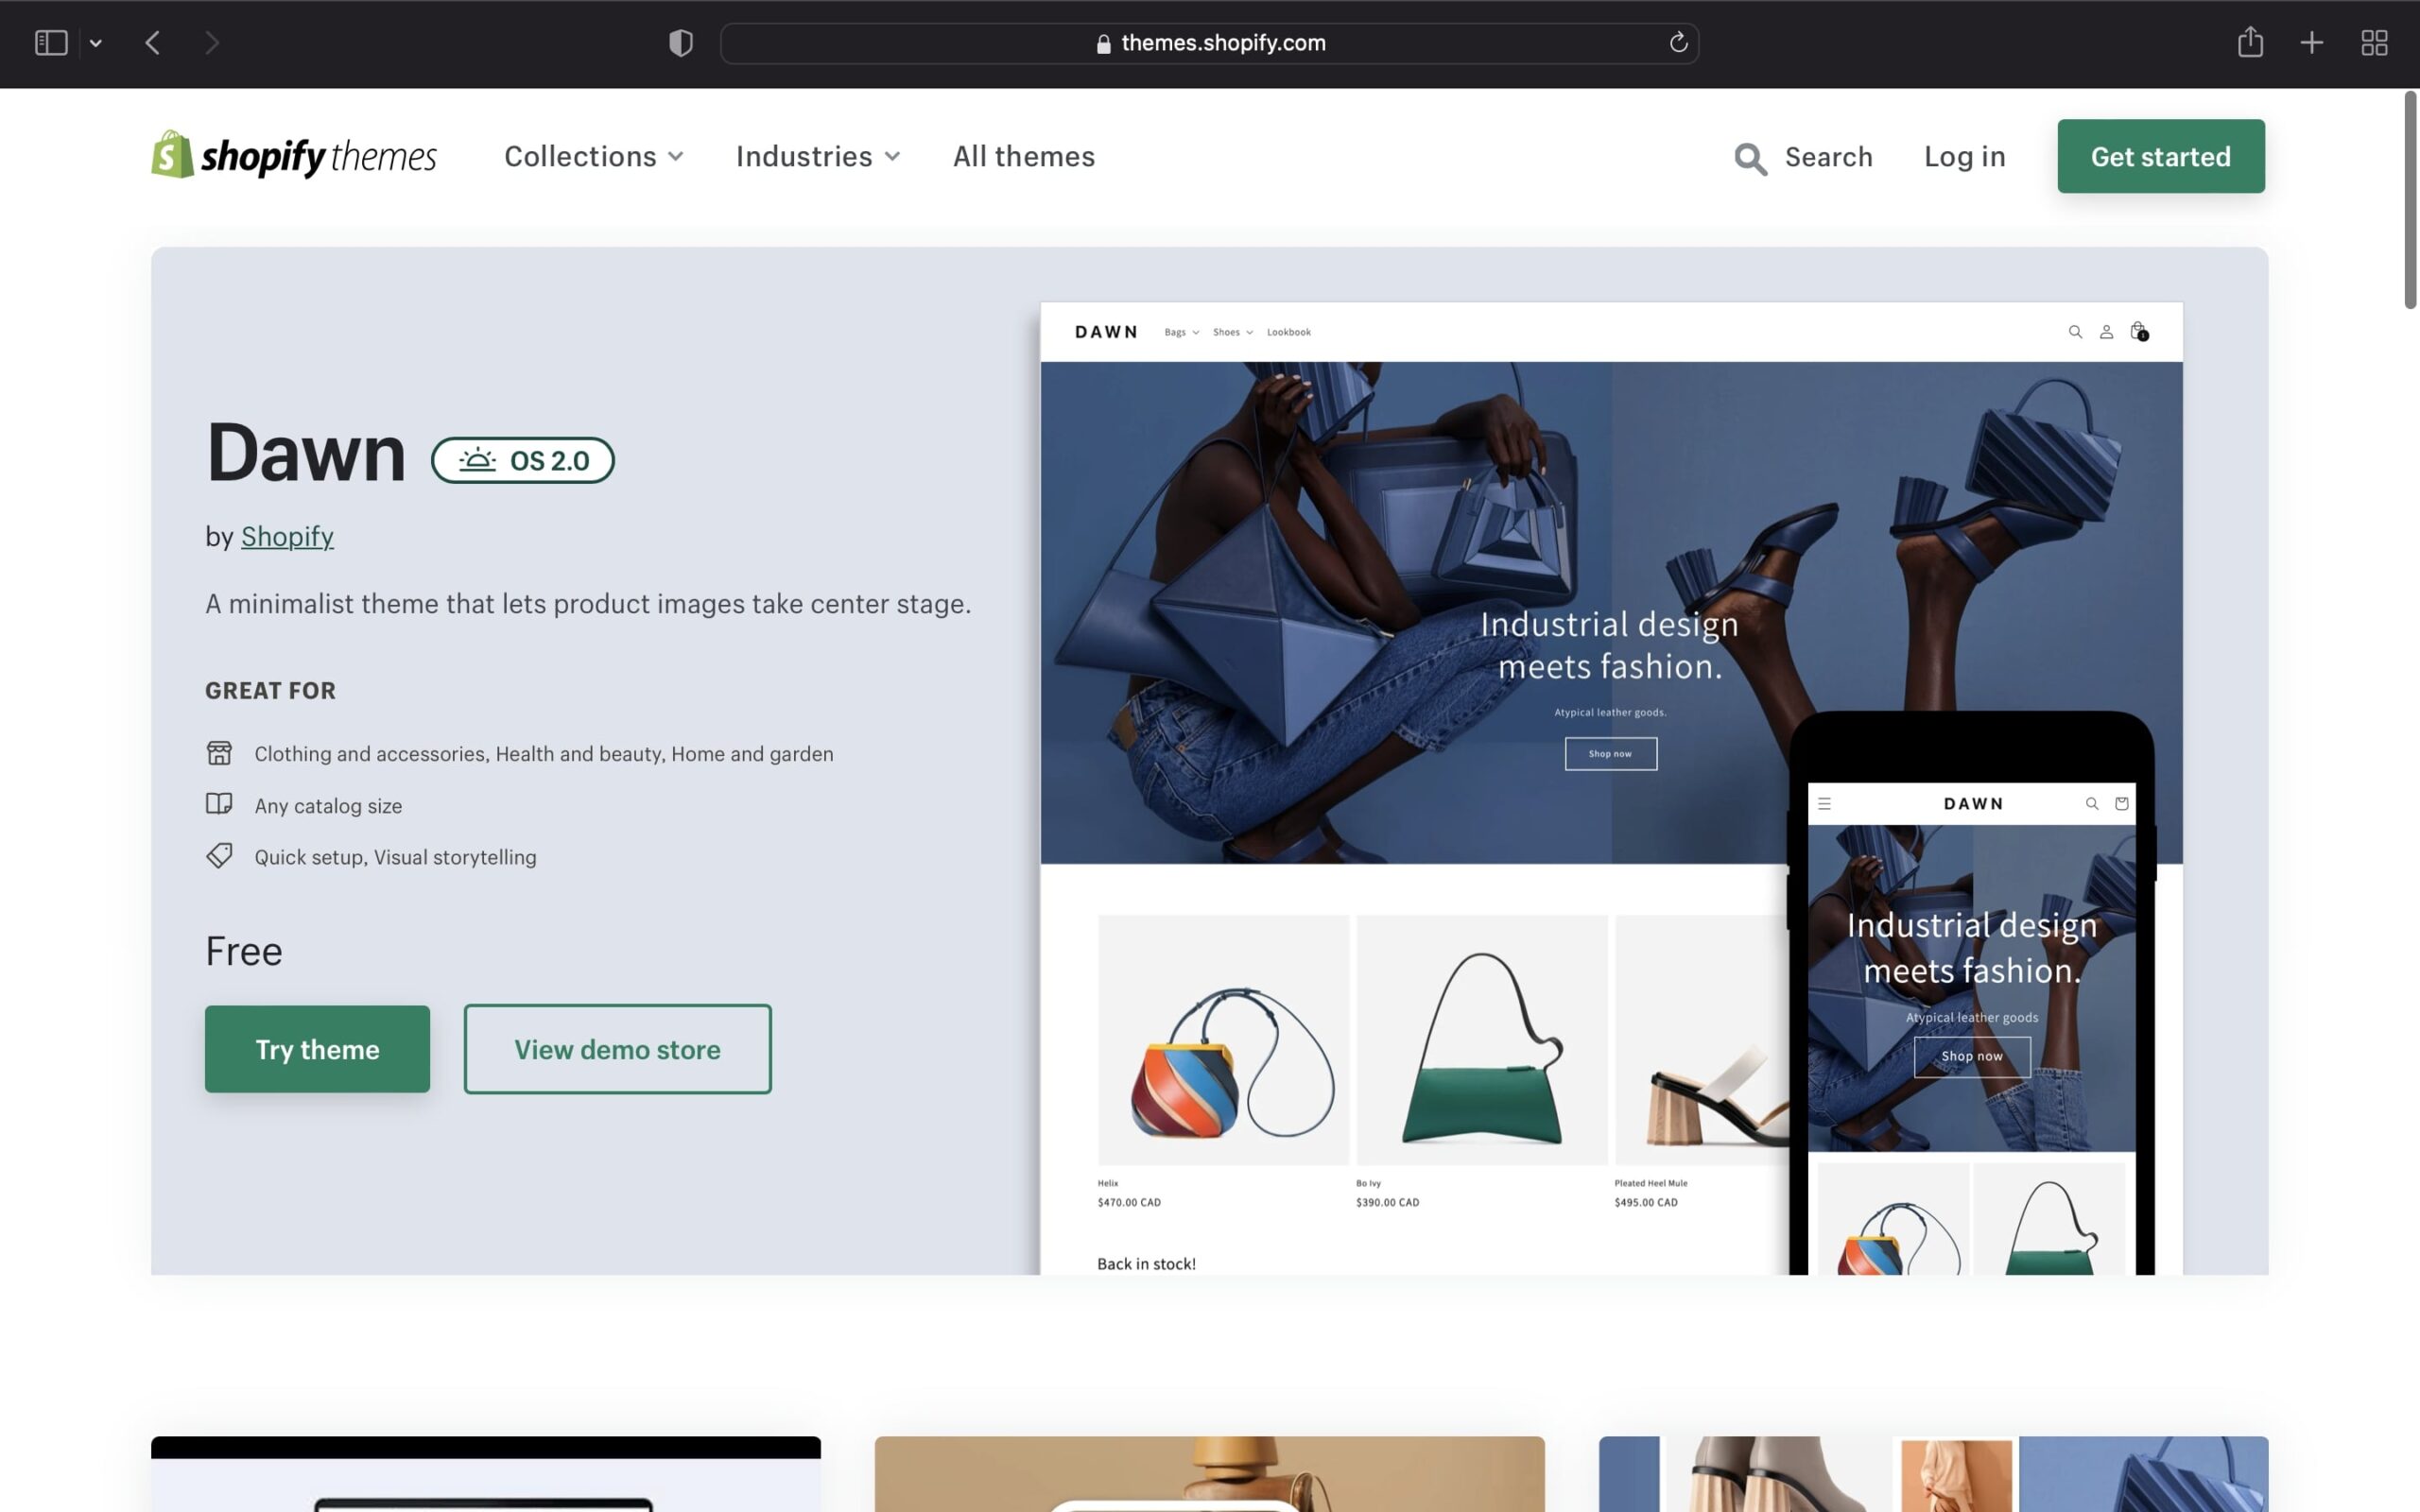 dawn theme, Shopify's first open-source reference theme